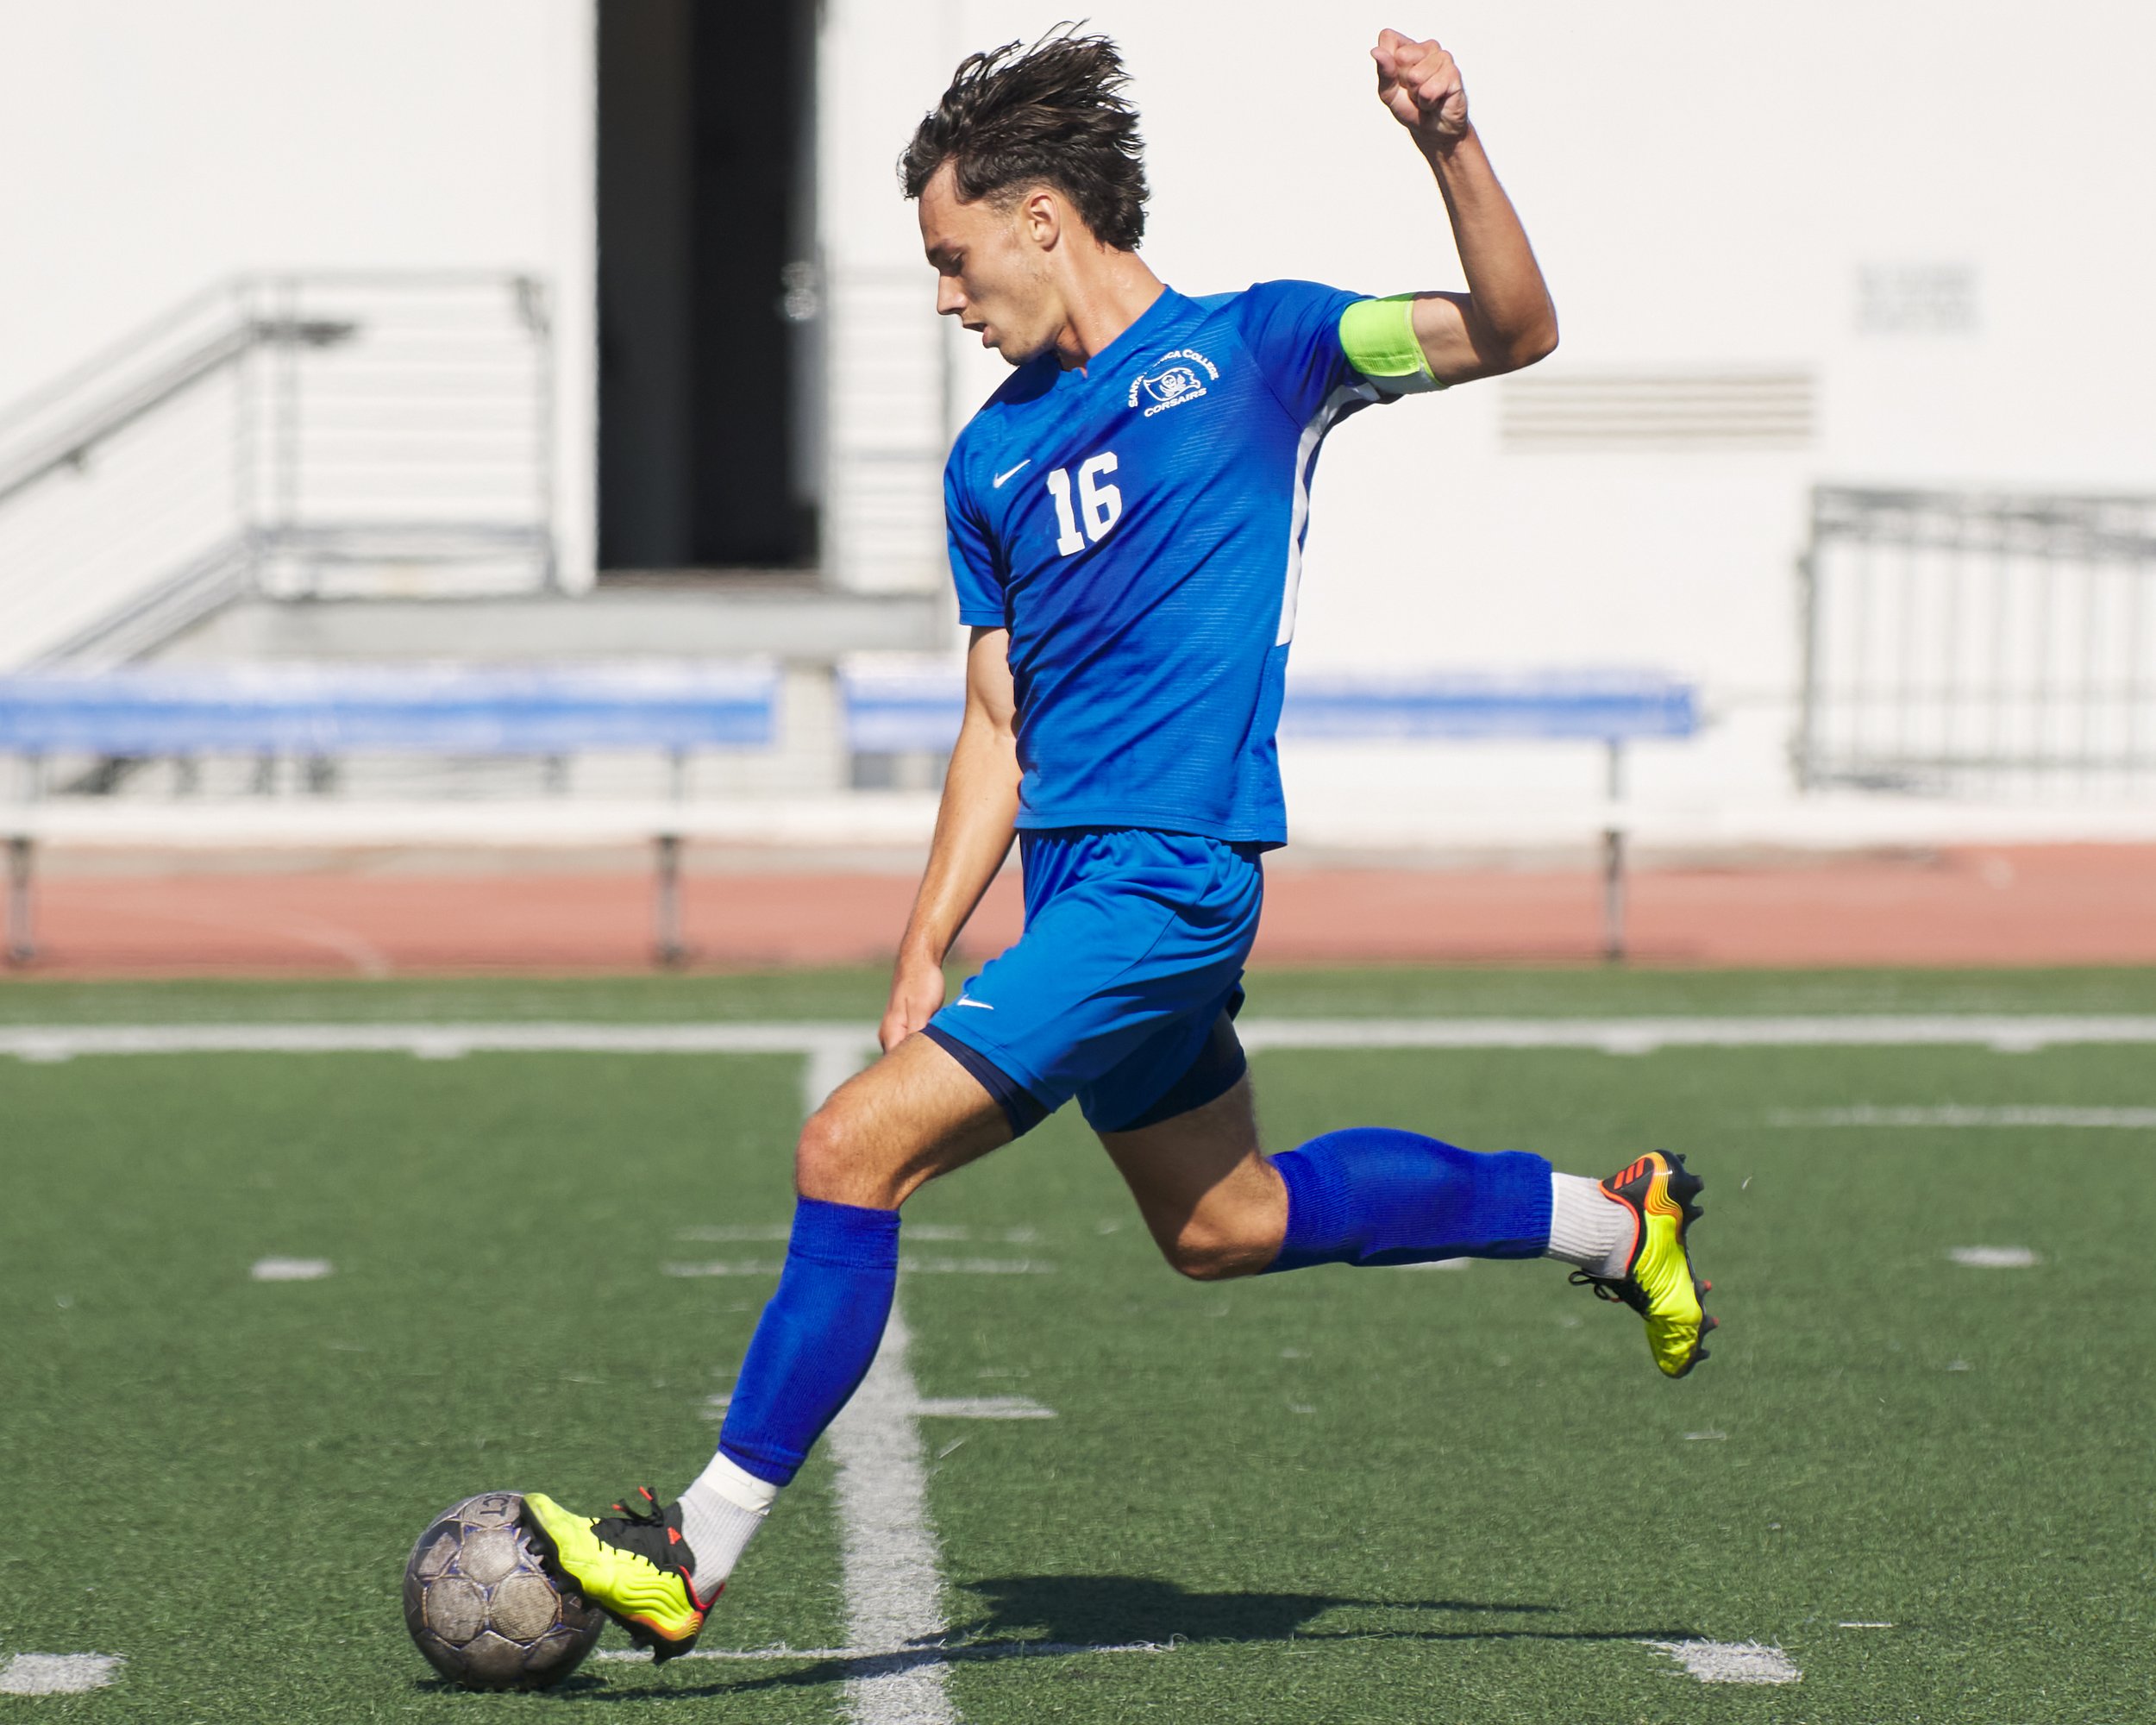  Santa Monica College Corsairs' Kyler Sorber during the men's soccer match against the Antelope Valley College Marauders on Friday, Sept. 30, 2022, at Corsair Field in Santa Monica, Calif. The Corsairs tied 1-1. (Nicholas McCall | The Corsair) 